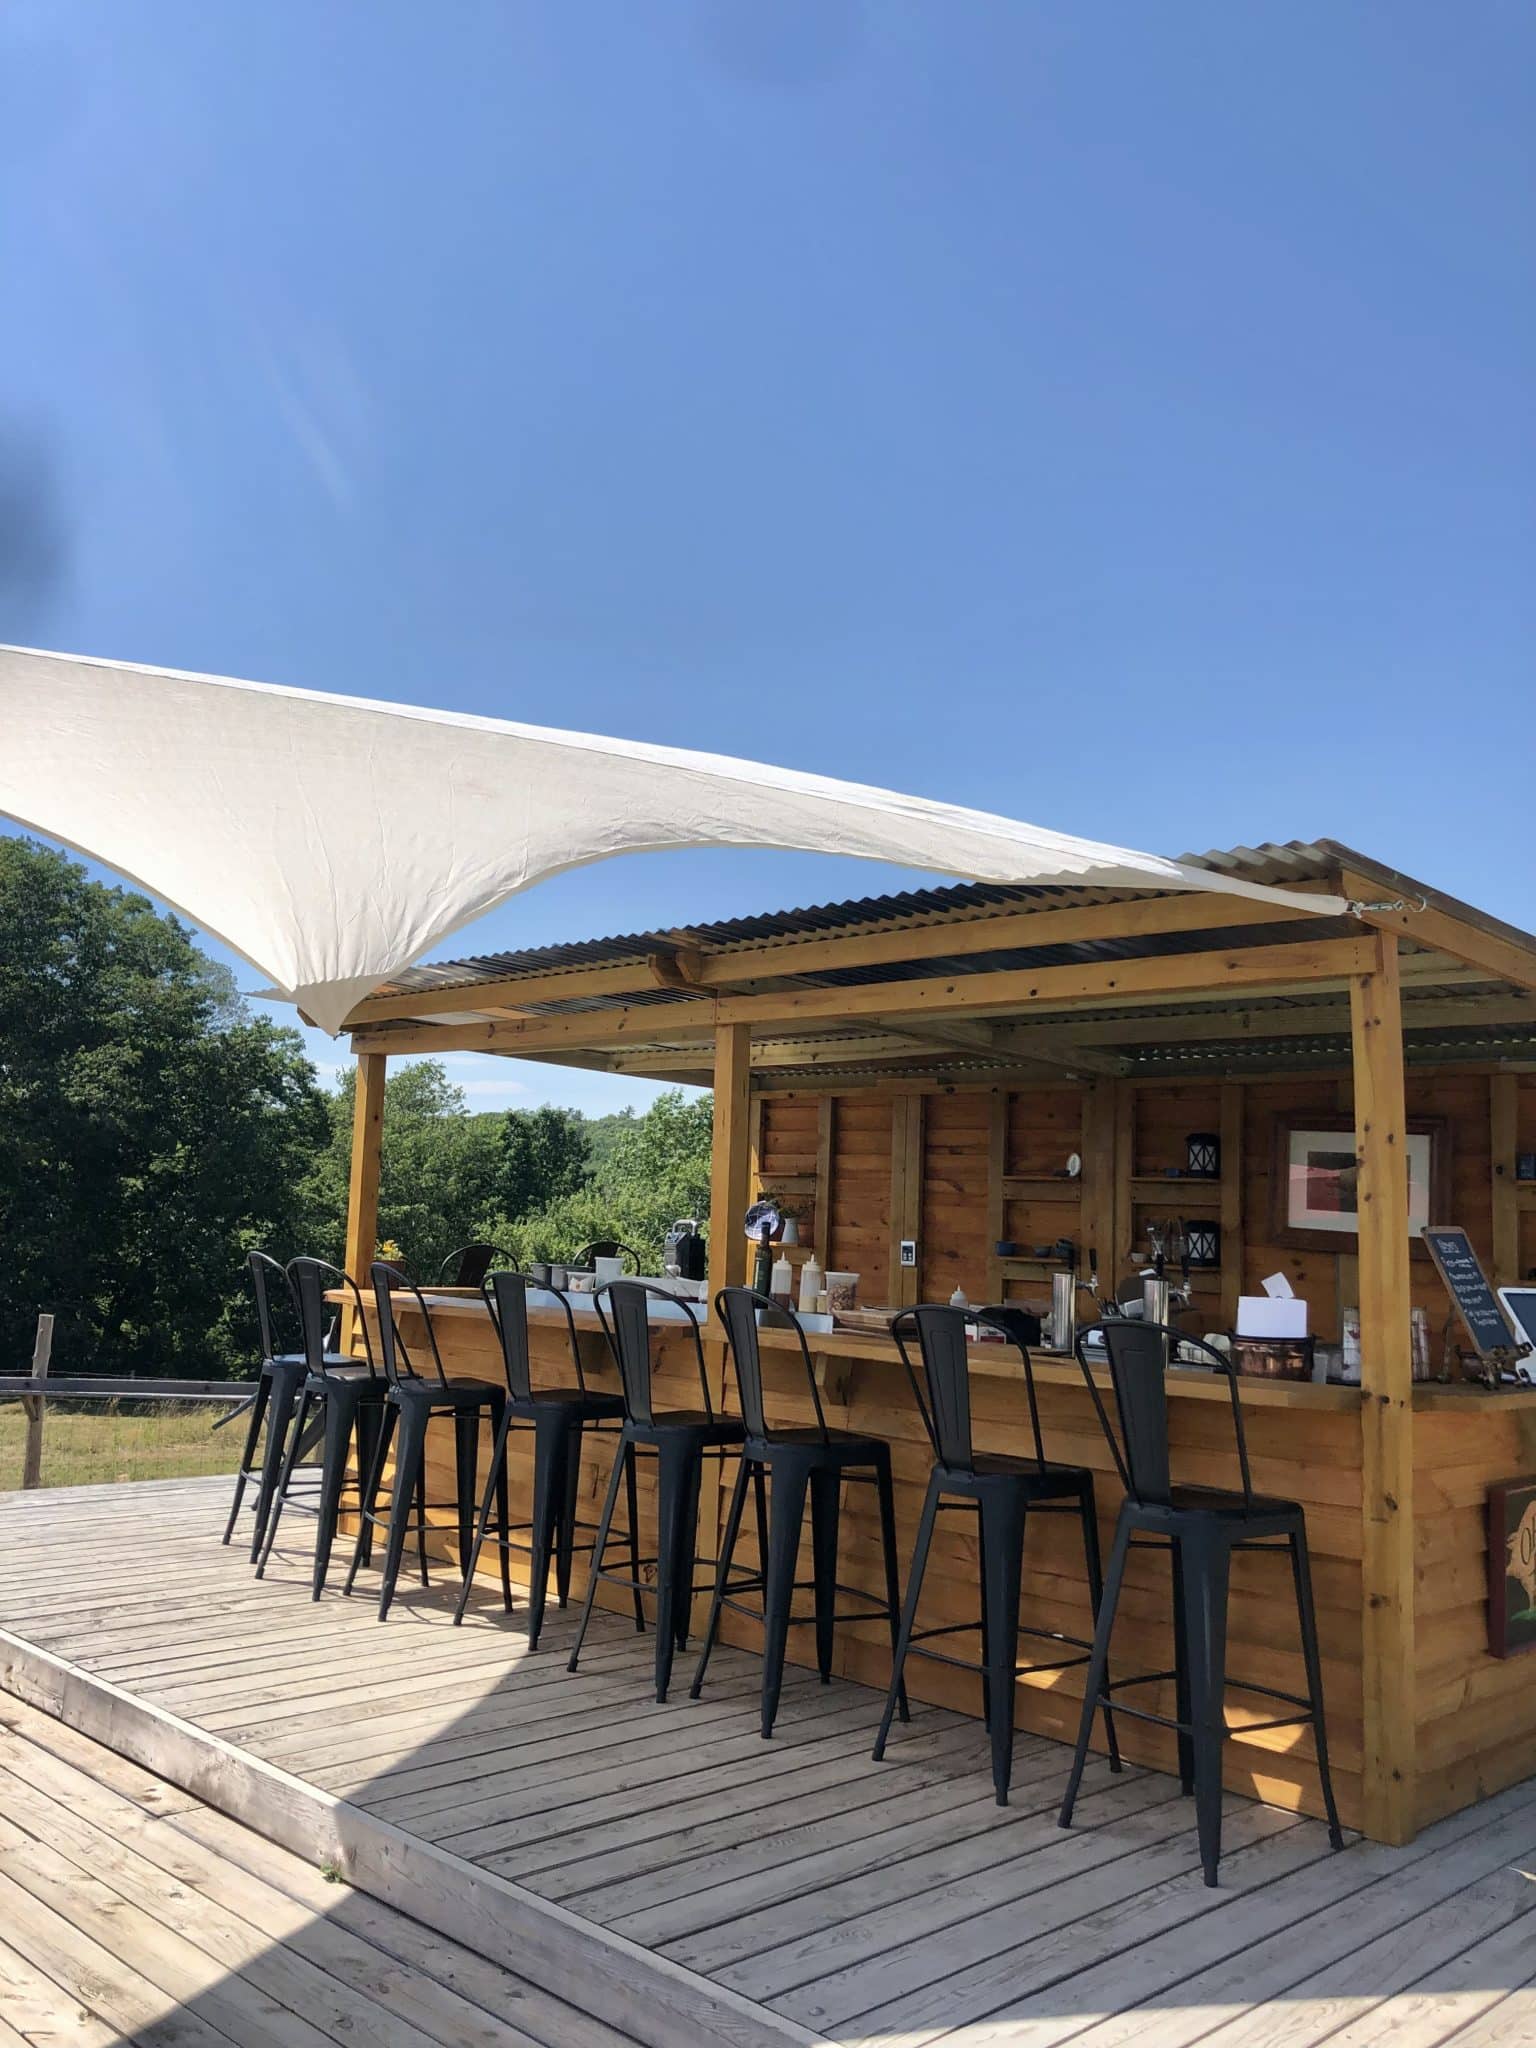 The Rooting Pig, Broad Arrow Farm's Charcuterie Bar.  Picture of the outdoor bar with bar stools and bright blue sky